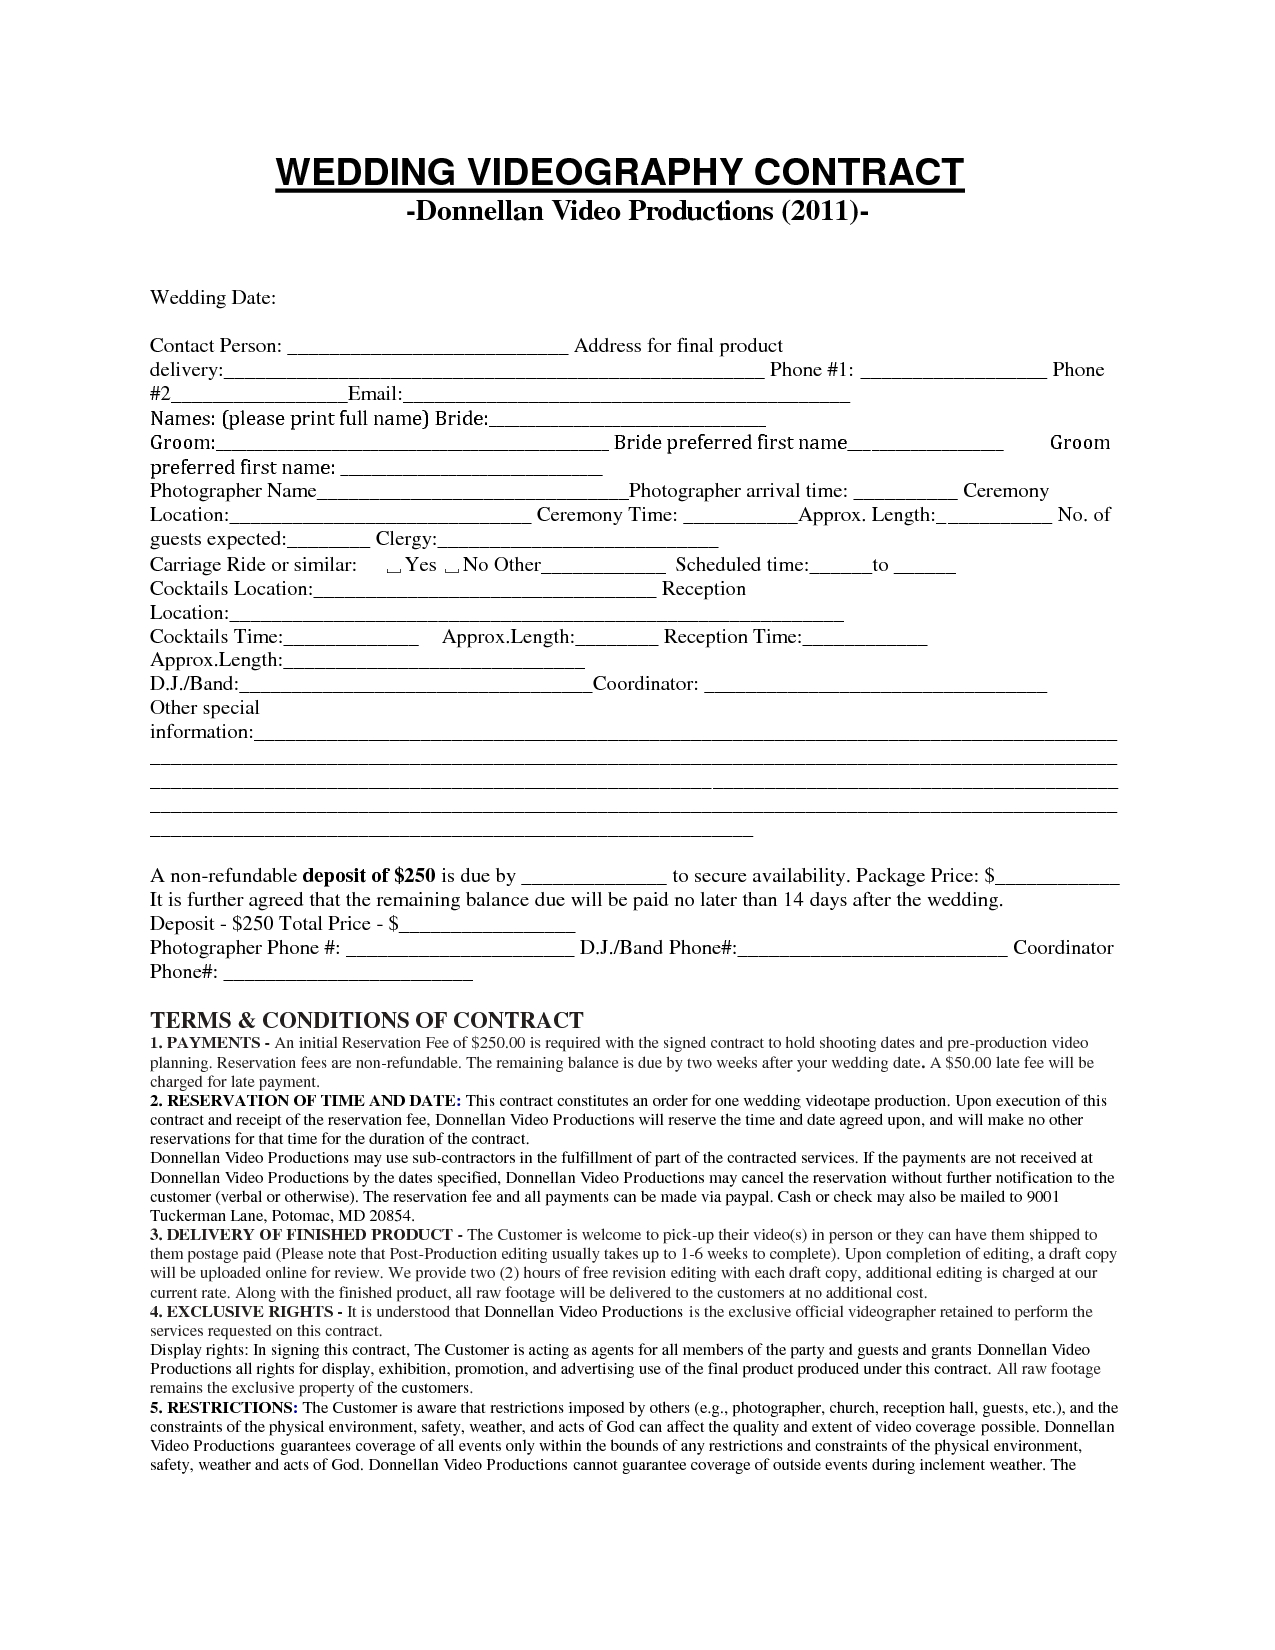 Videographer Contract - Free Printable Documents within Film Editor Contract Template